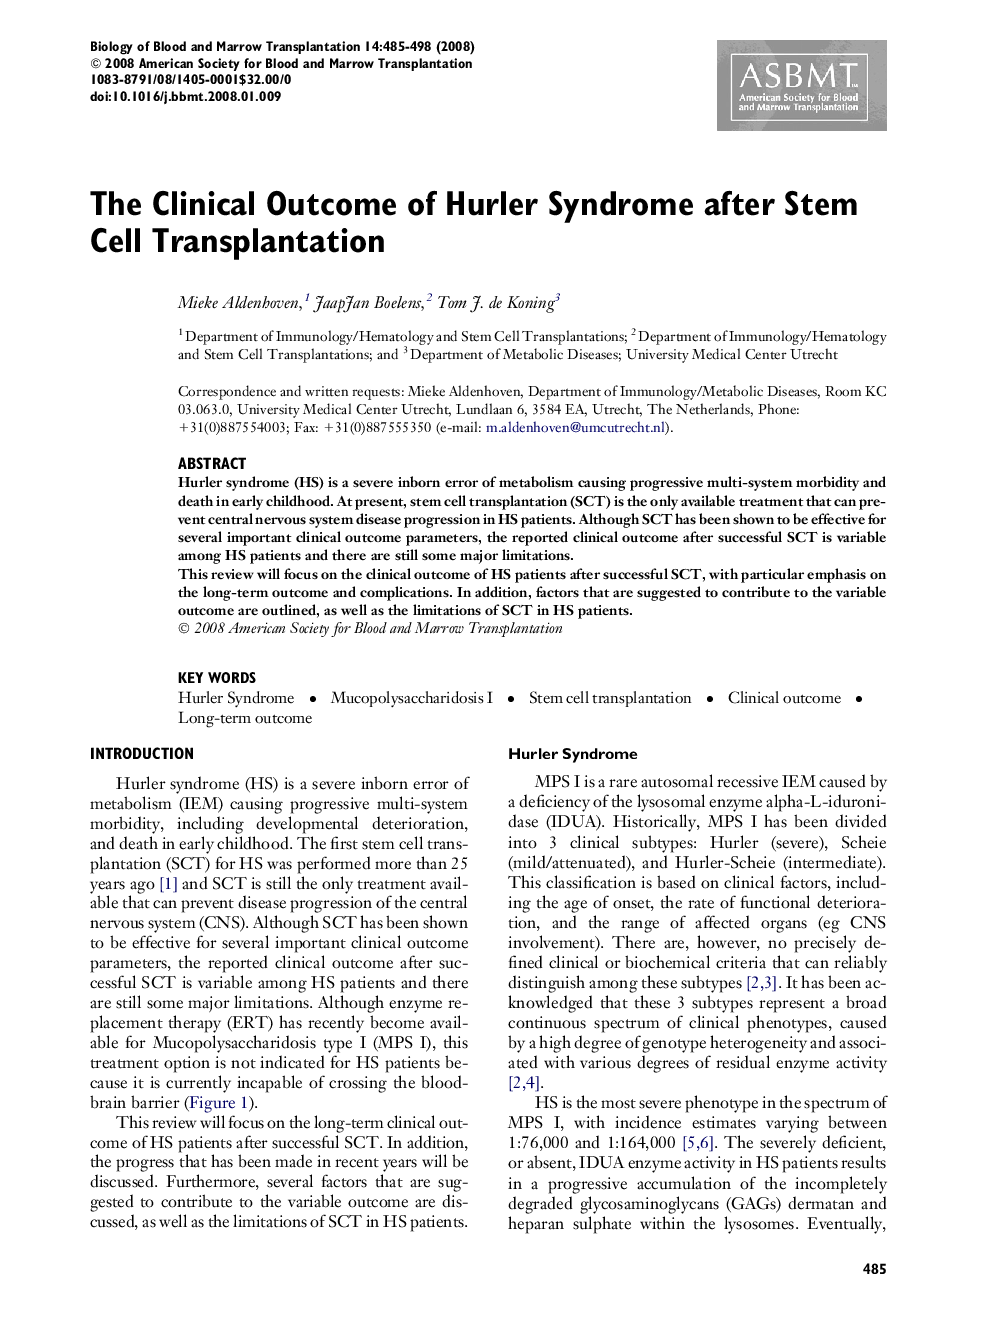 The Clinical Outcome of Hurler Syndrome after Stem Cell Transplantation